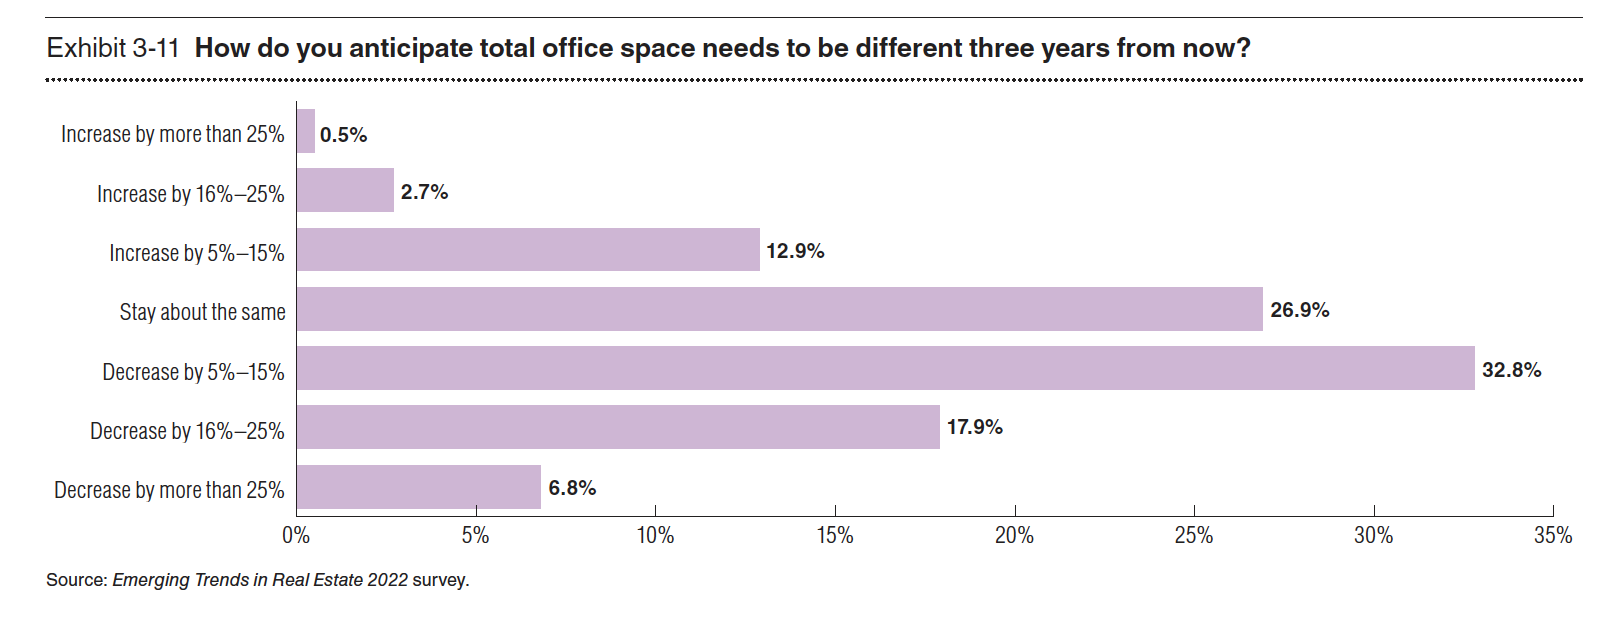 Office space needs are expected to decline